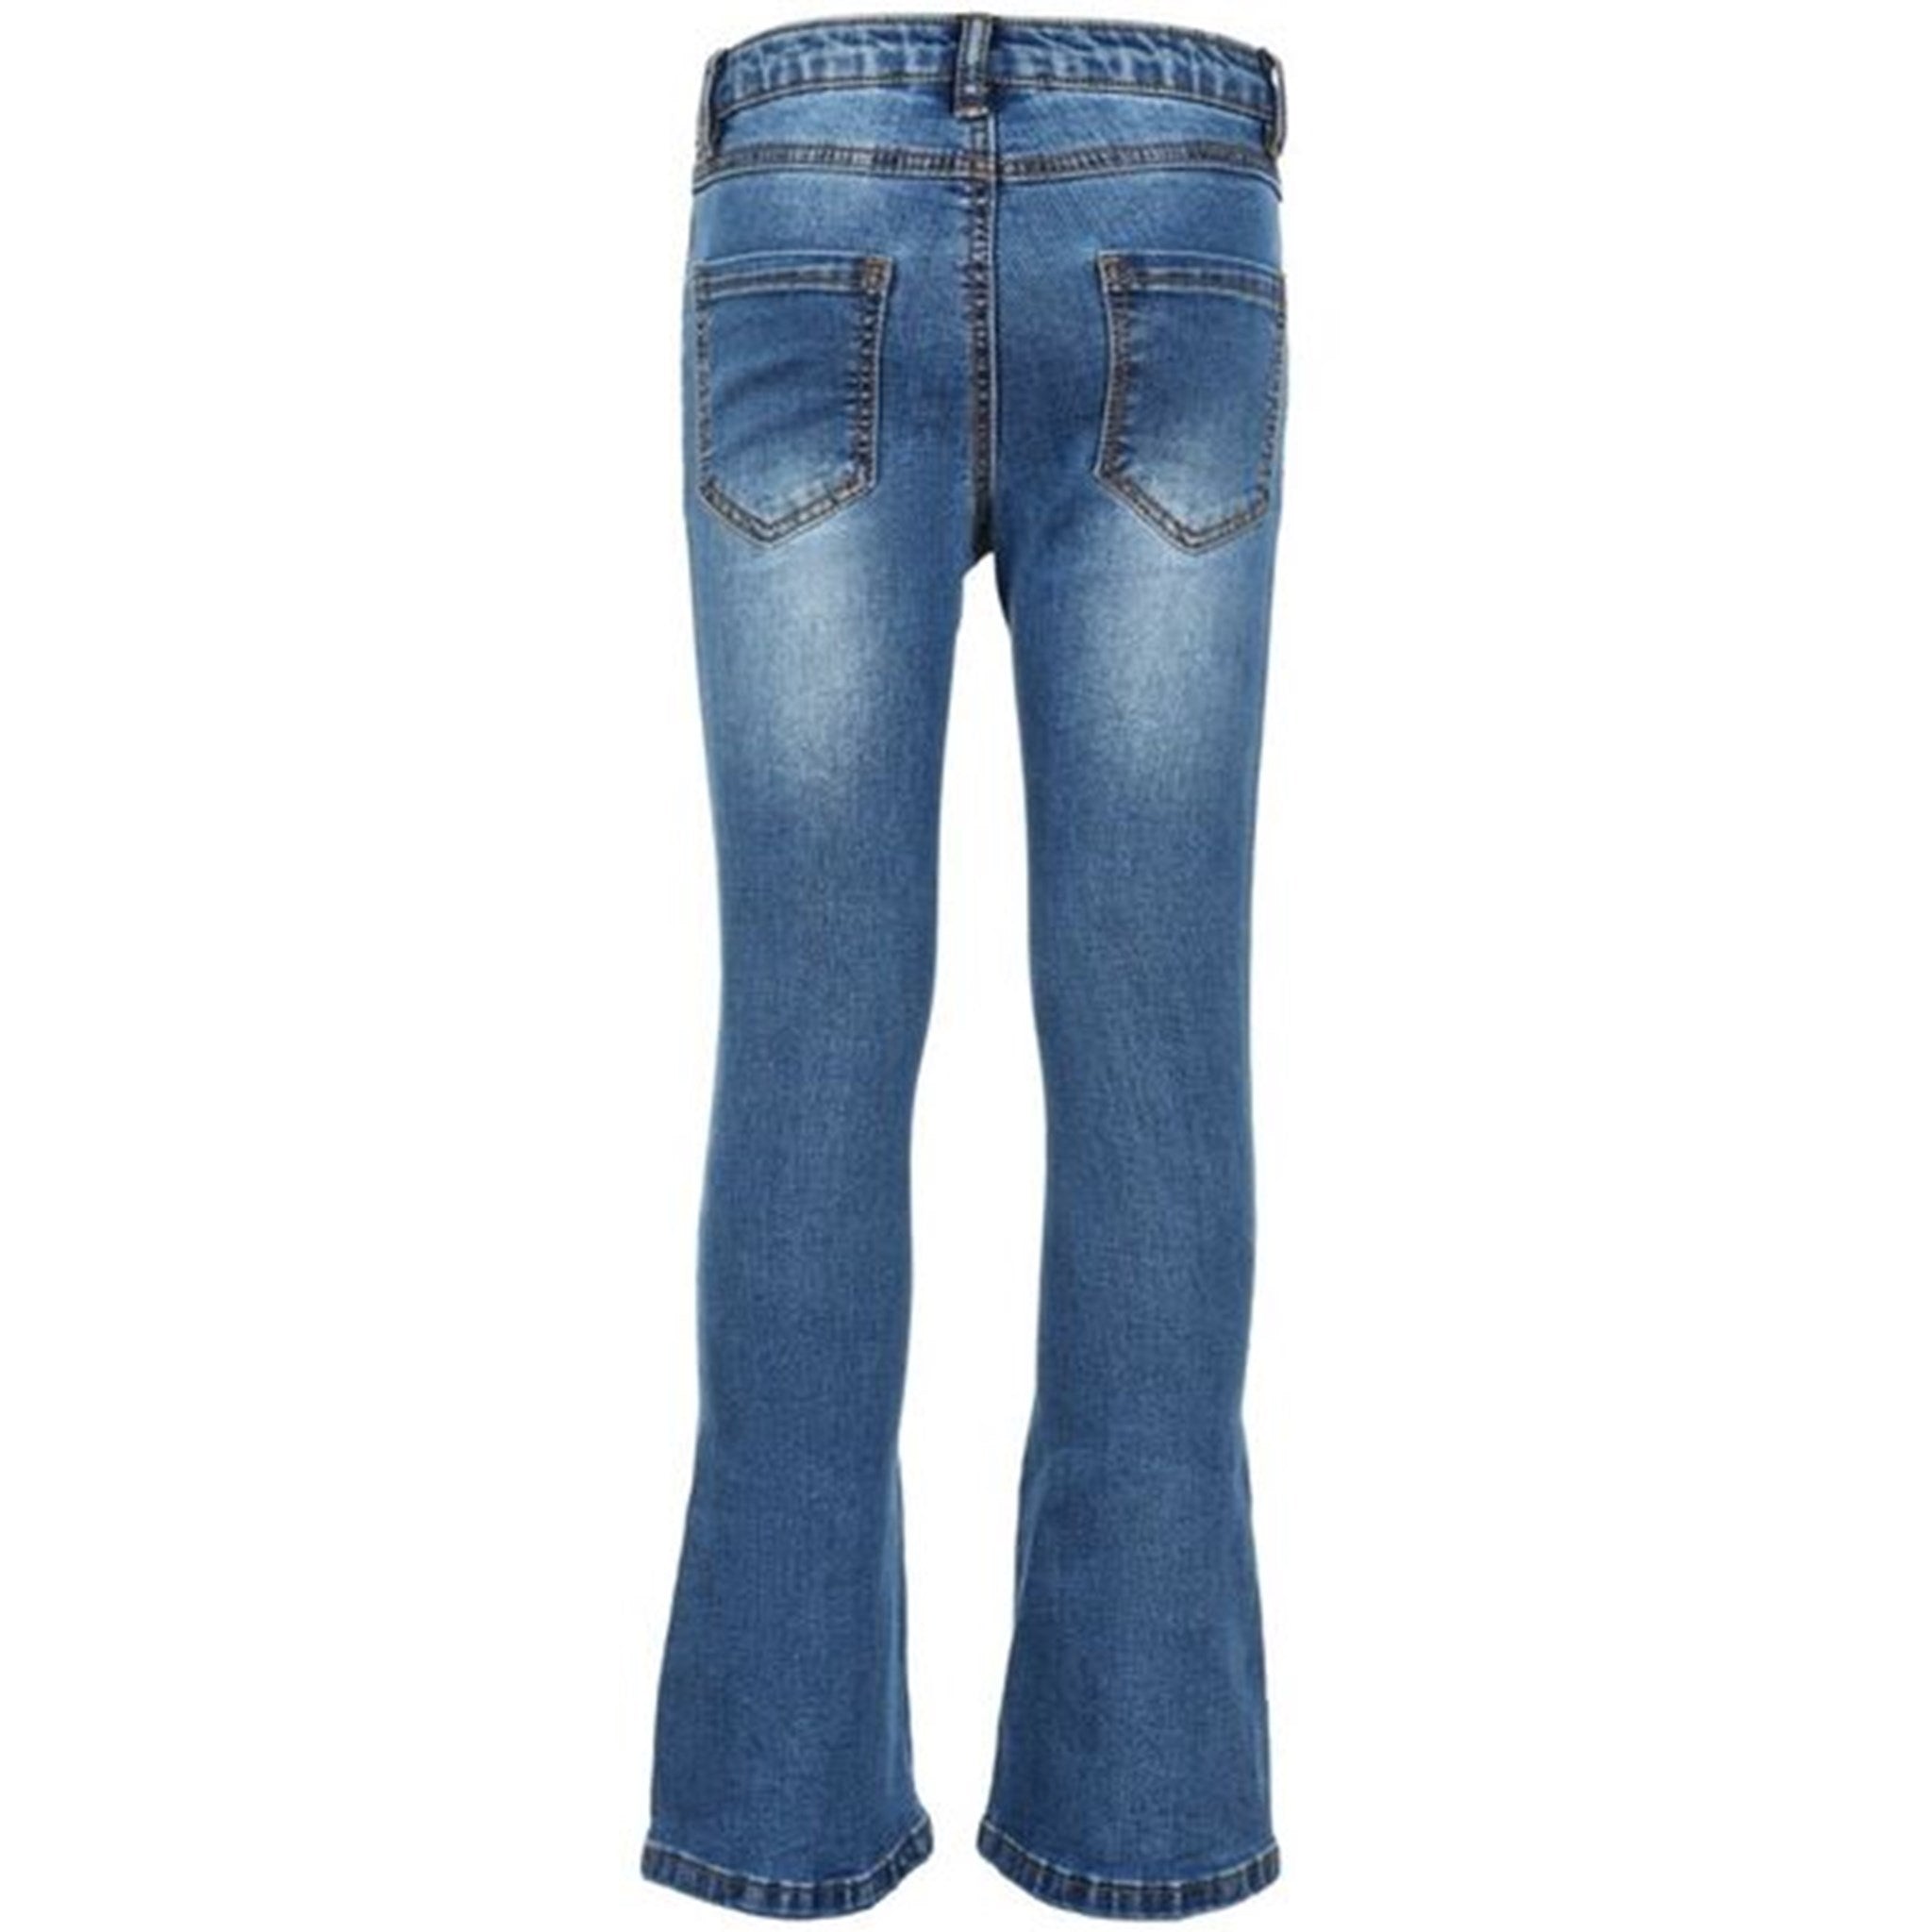 The New Flared Jeans Blue Denim 2